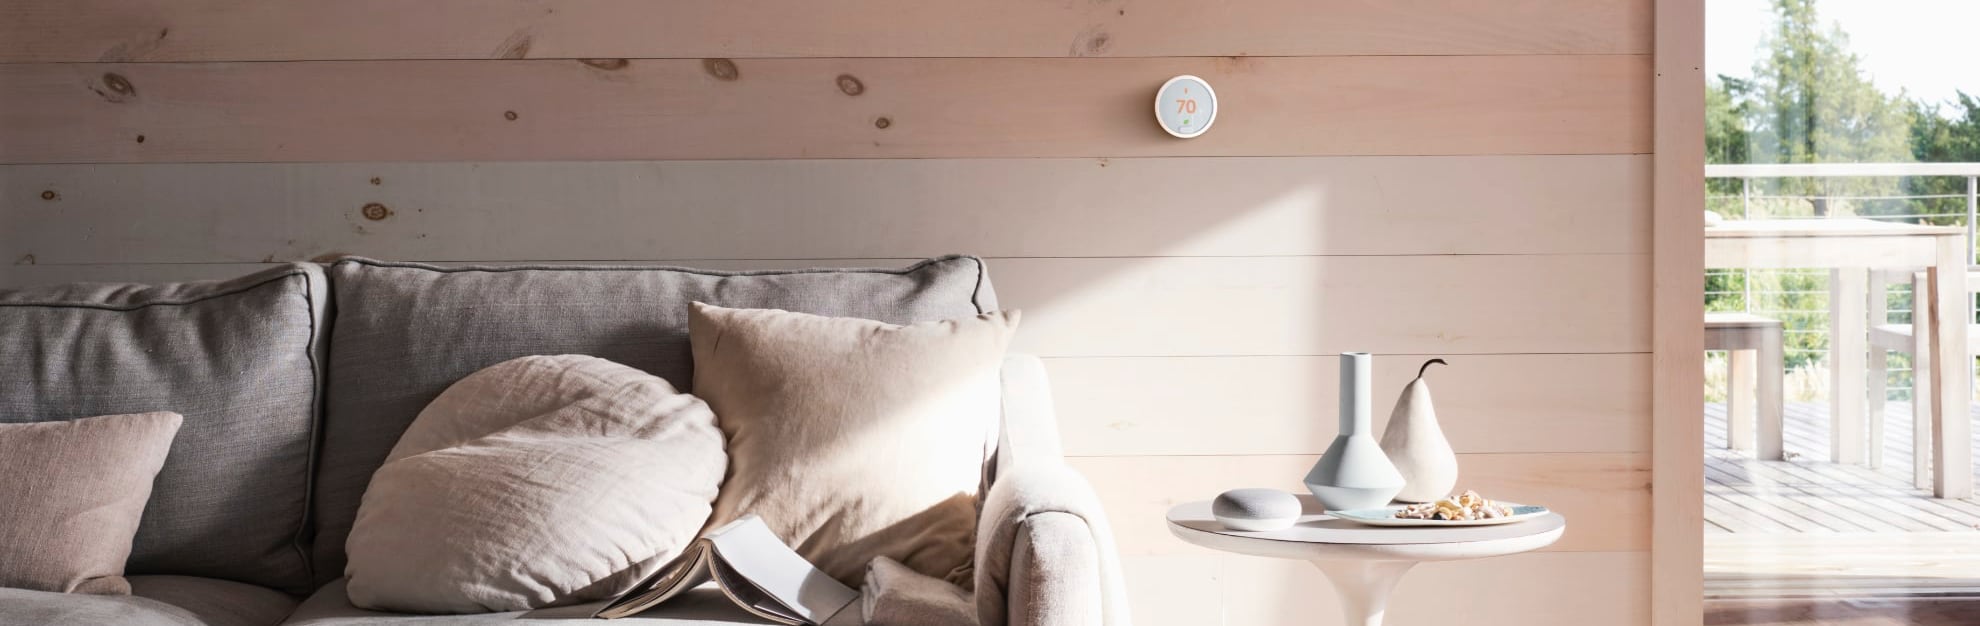 Vivint Home Automation in San Diego